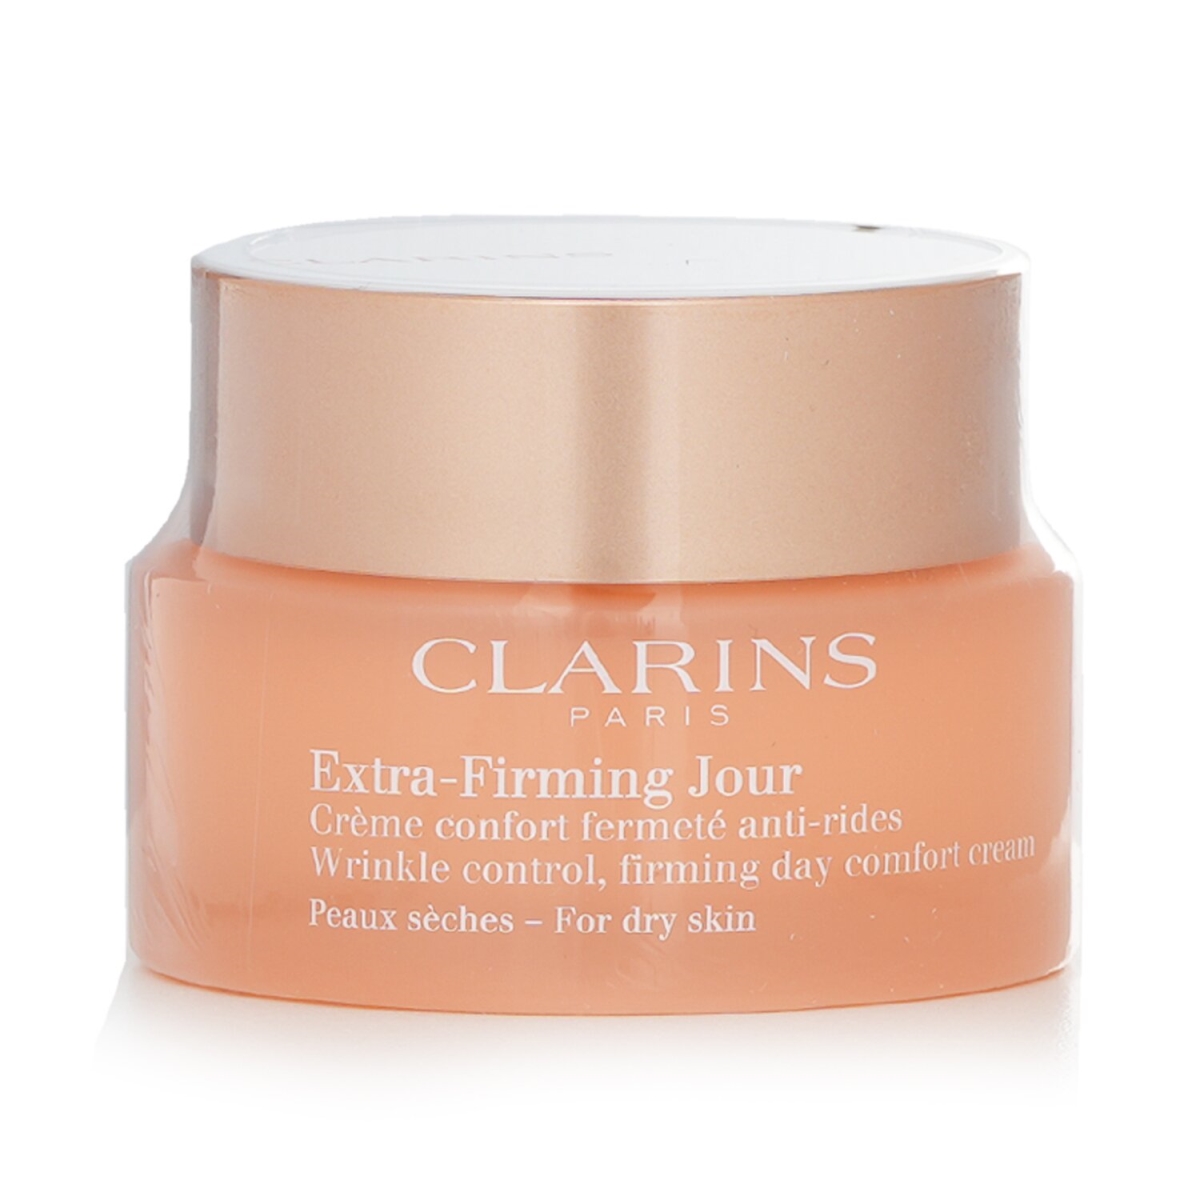 Picture of Clarins 279603 1.7 oz Extra Firming Jour Wrinkle Control, Firming Day Comfort Cream for Dry Skin